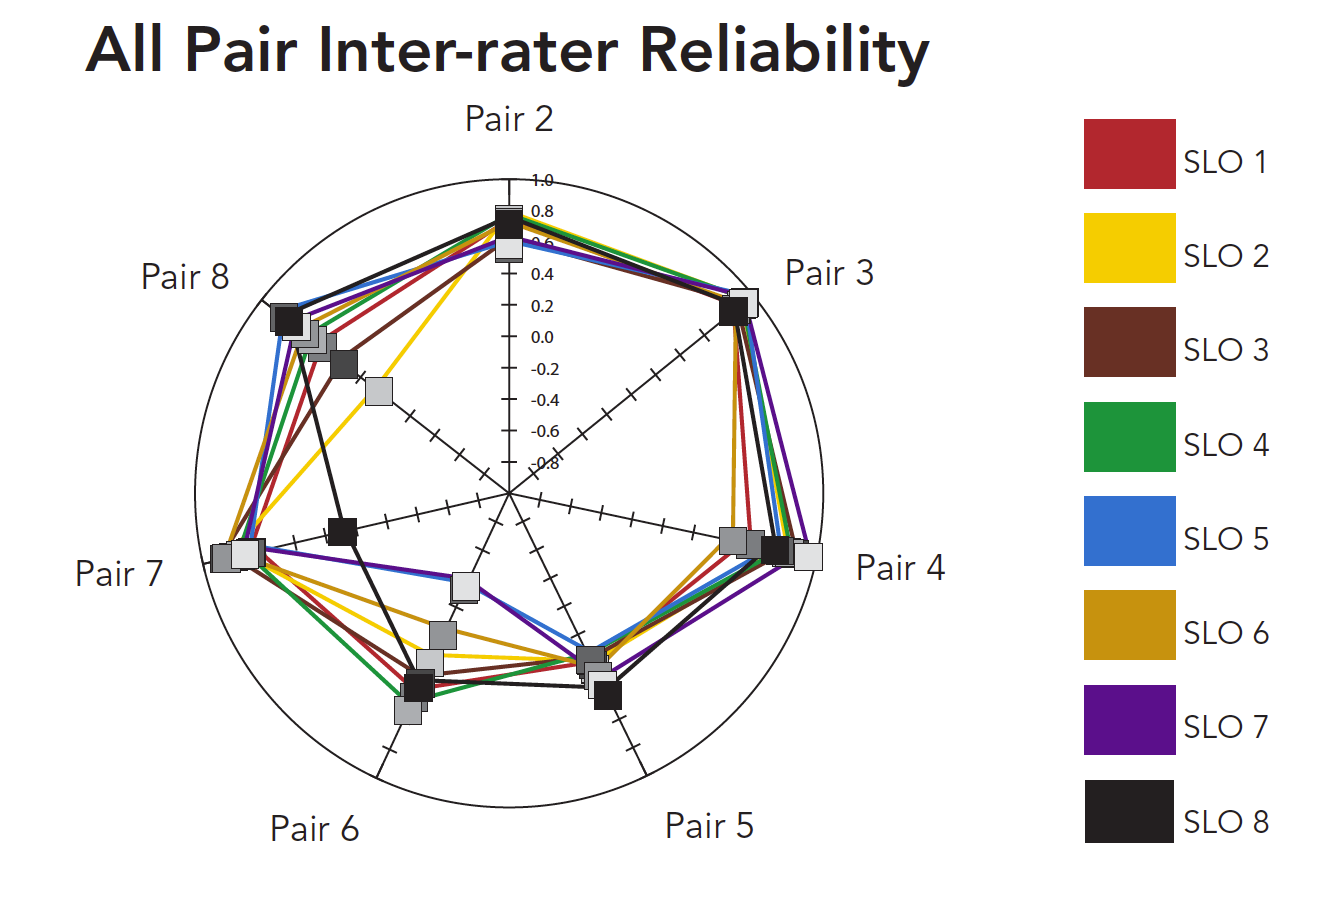 All Pair Inter-rater Reliability